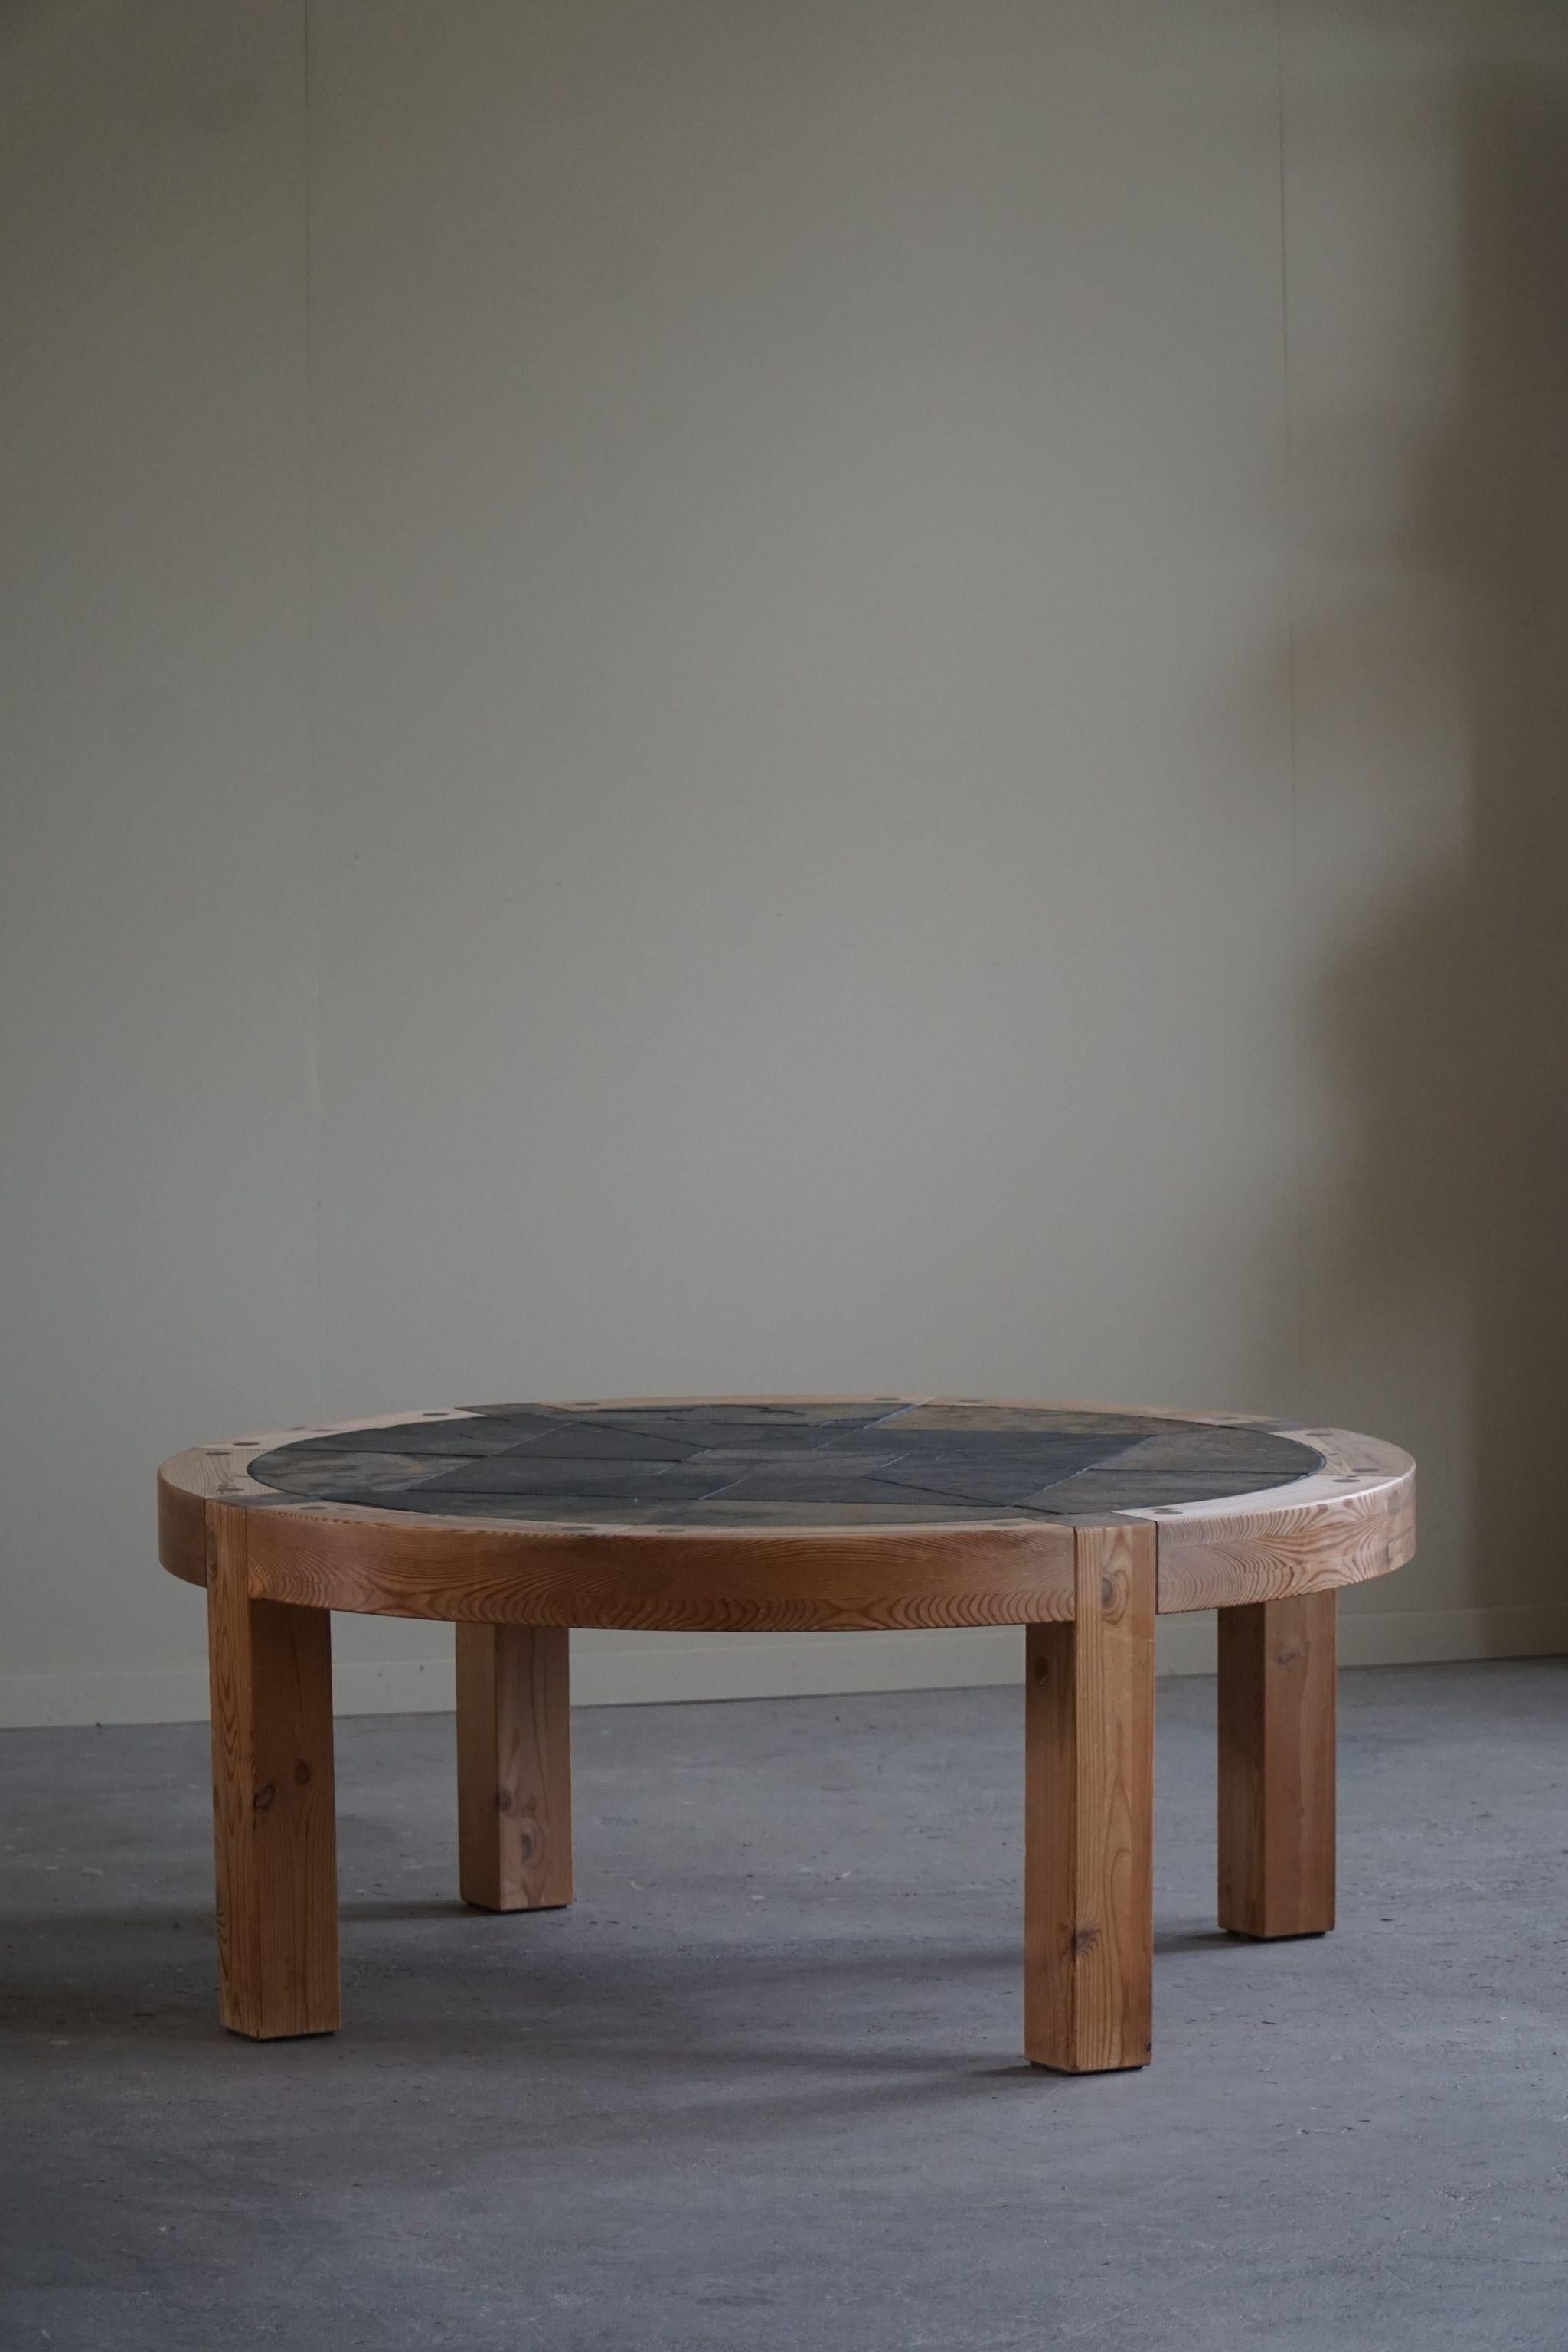 Large Round Coffee Table in Pine & Ceramic by Sallingboe, Danish Design, 1970s In Good Condition For Sale In Odense, DK